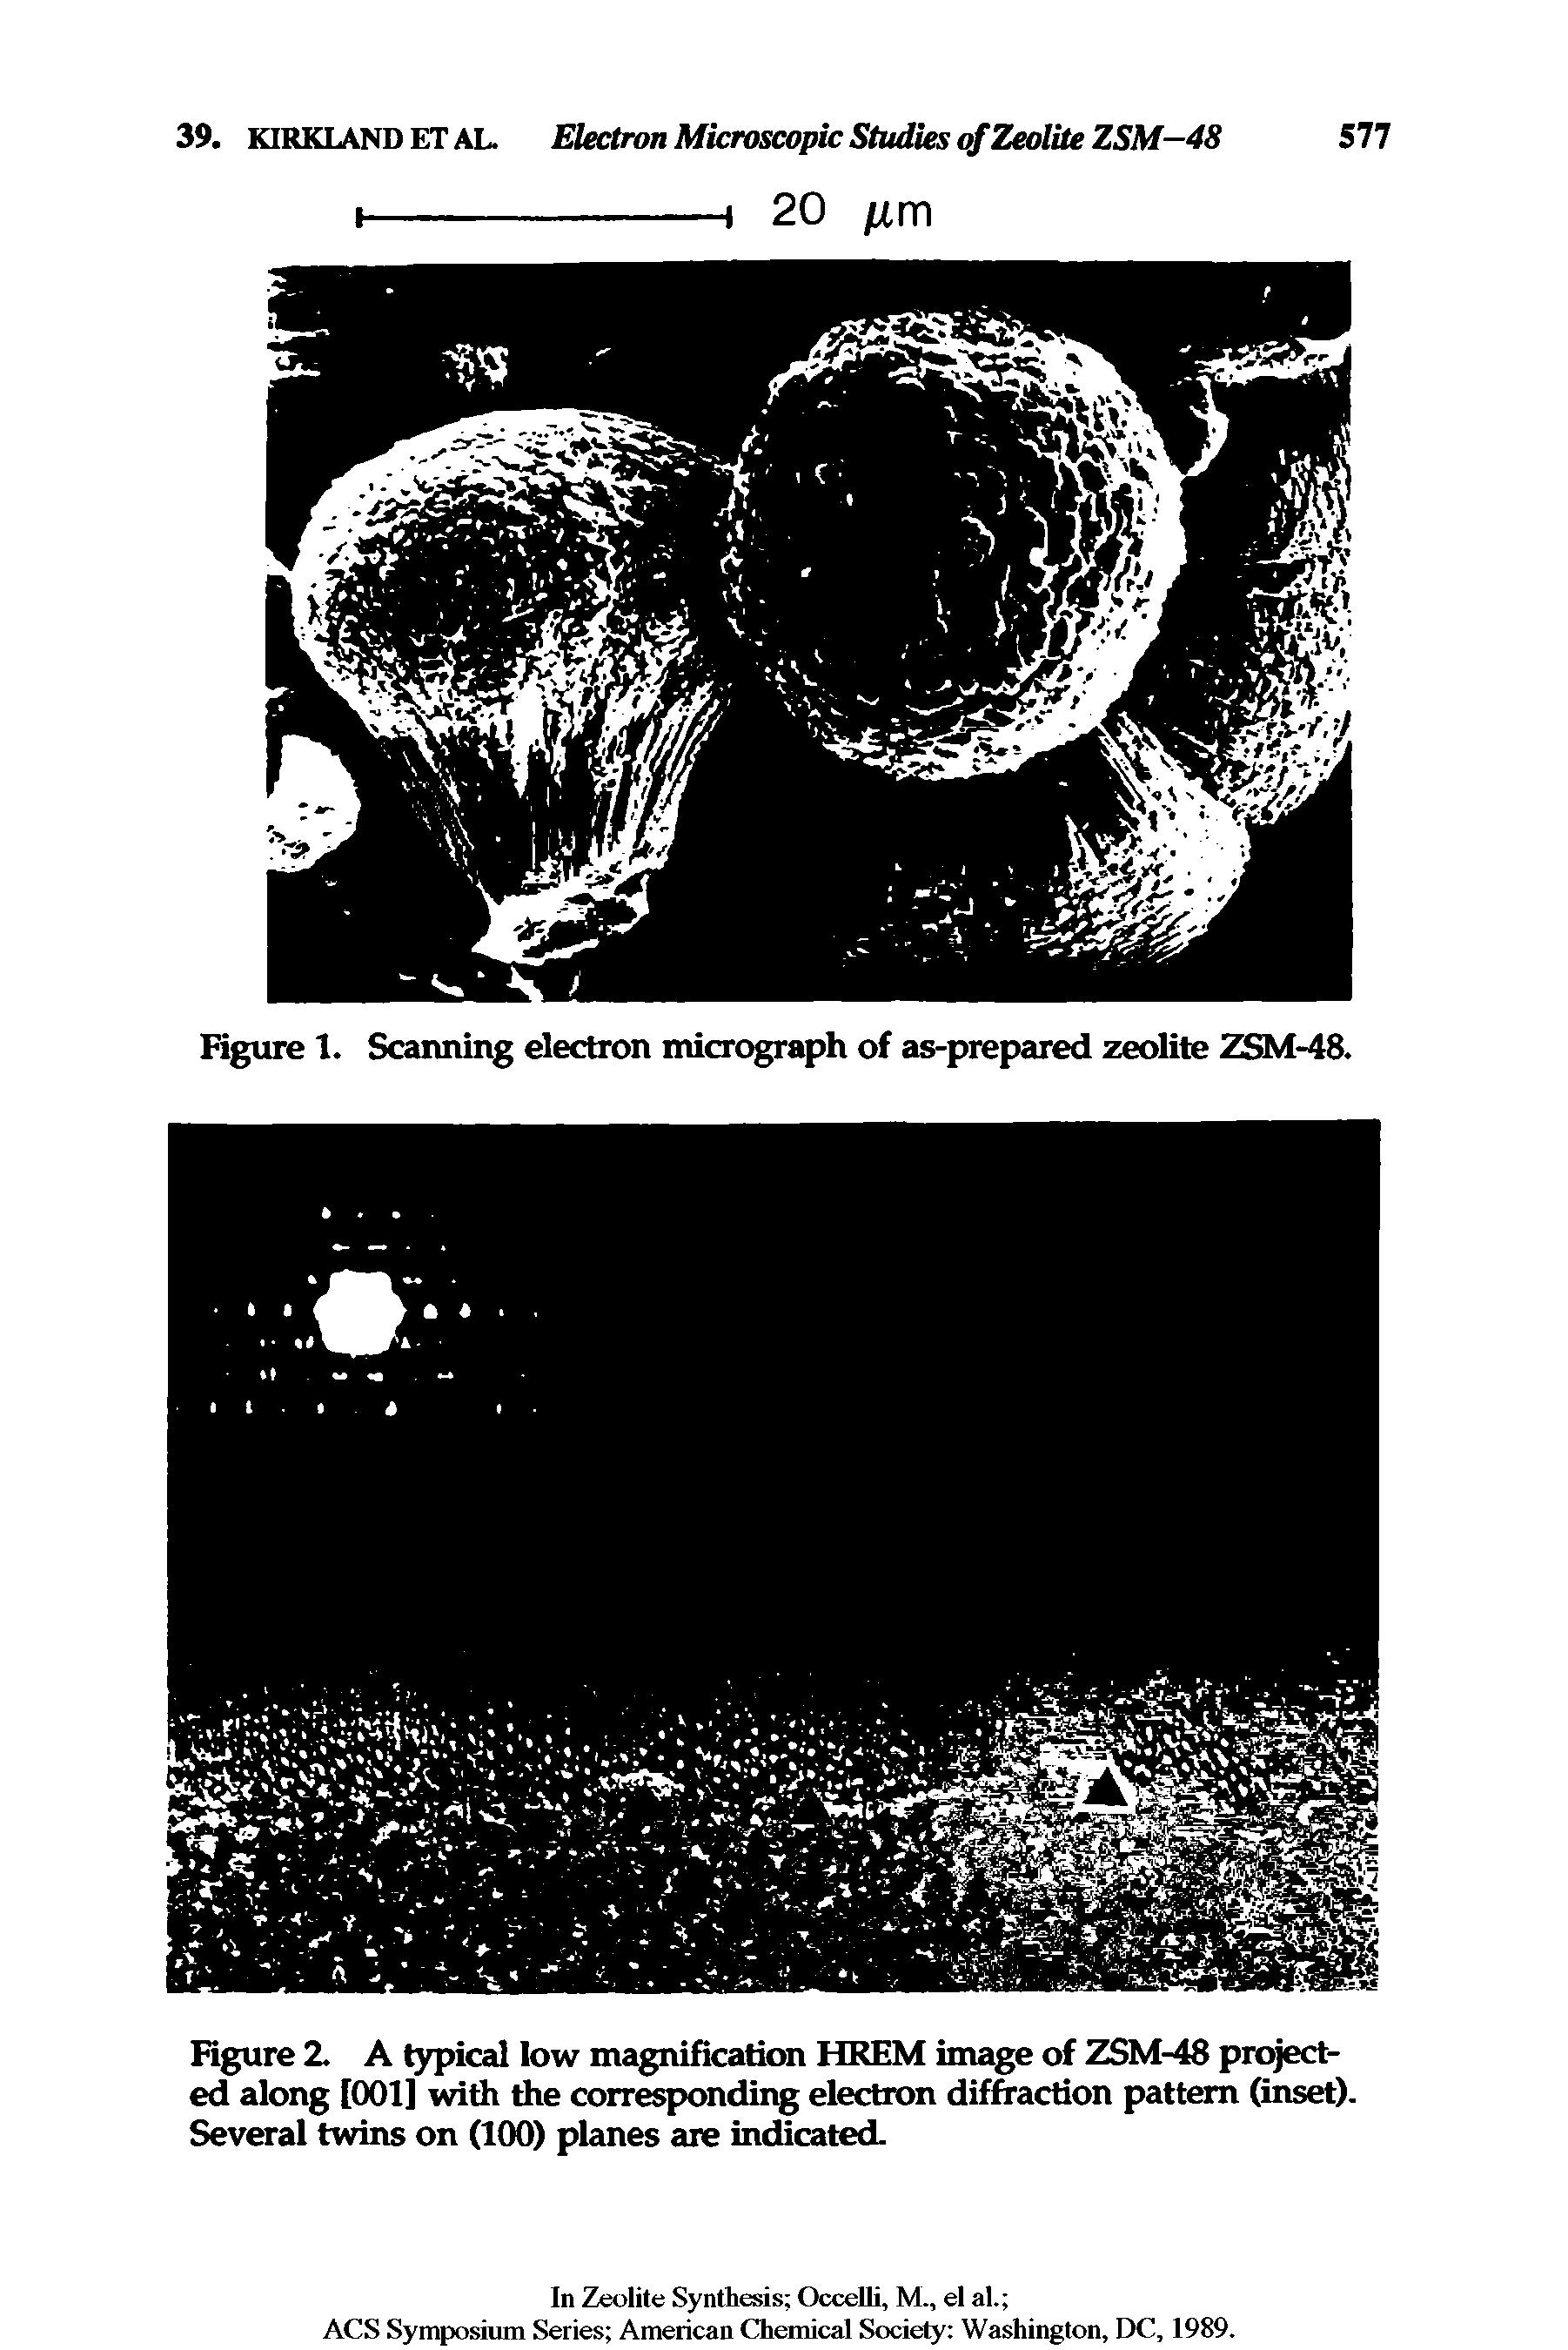 Figure 1. Scanning electron micrograph of as-prepared zeolite ZSM-48.